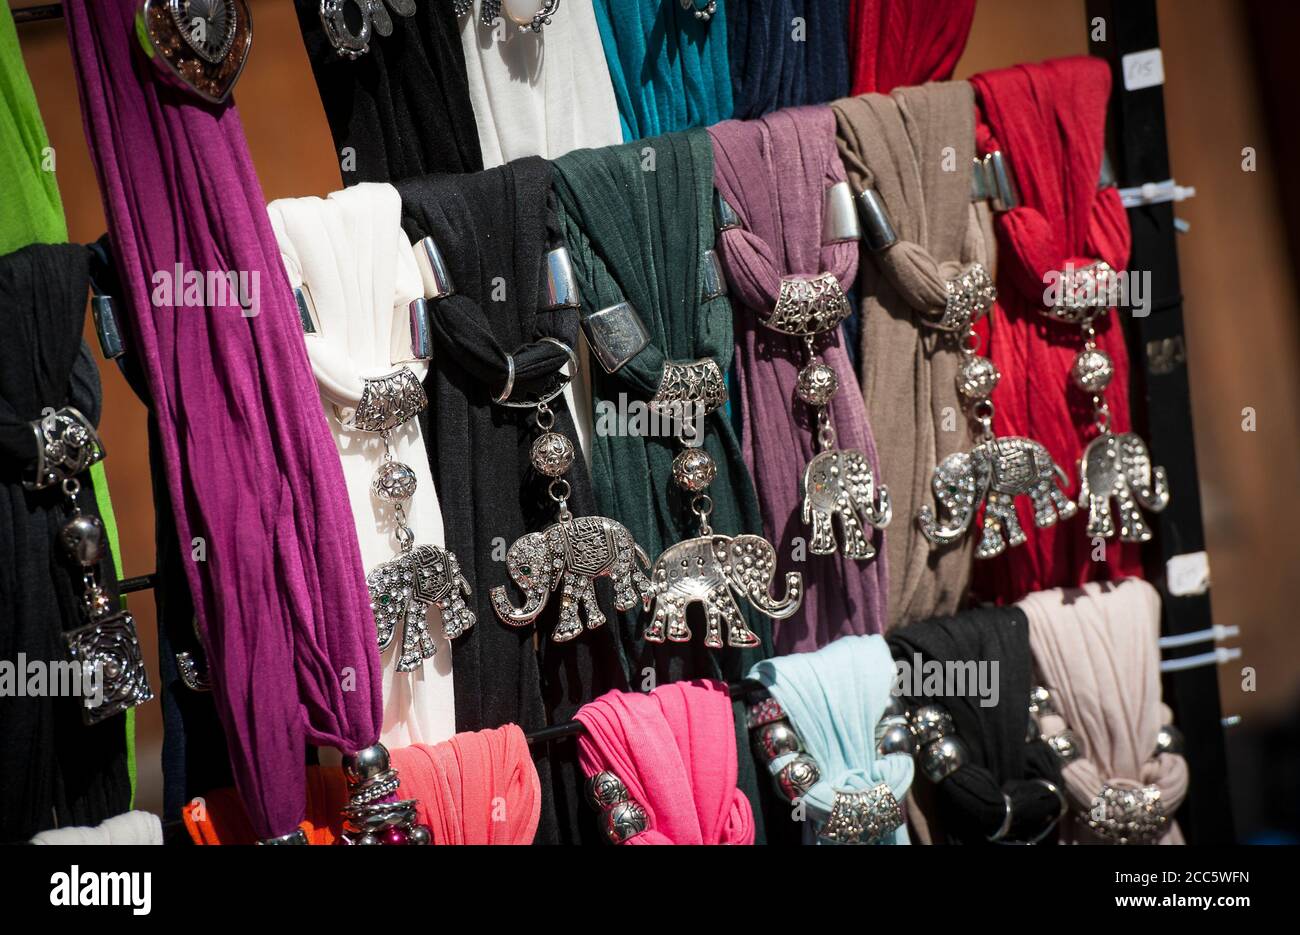 Display of scarves with elephant scarf rings for sale outside a shop. Stock Photo